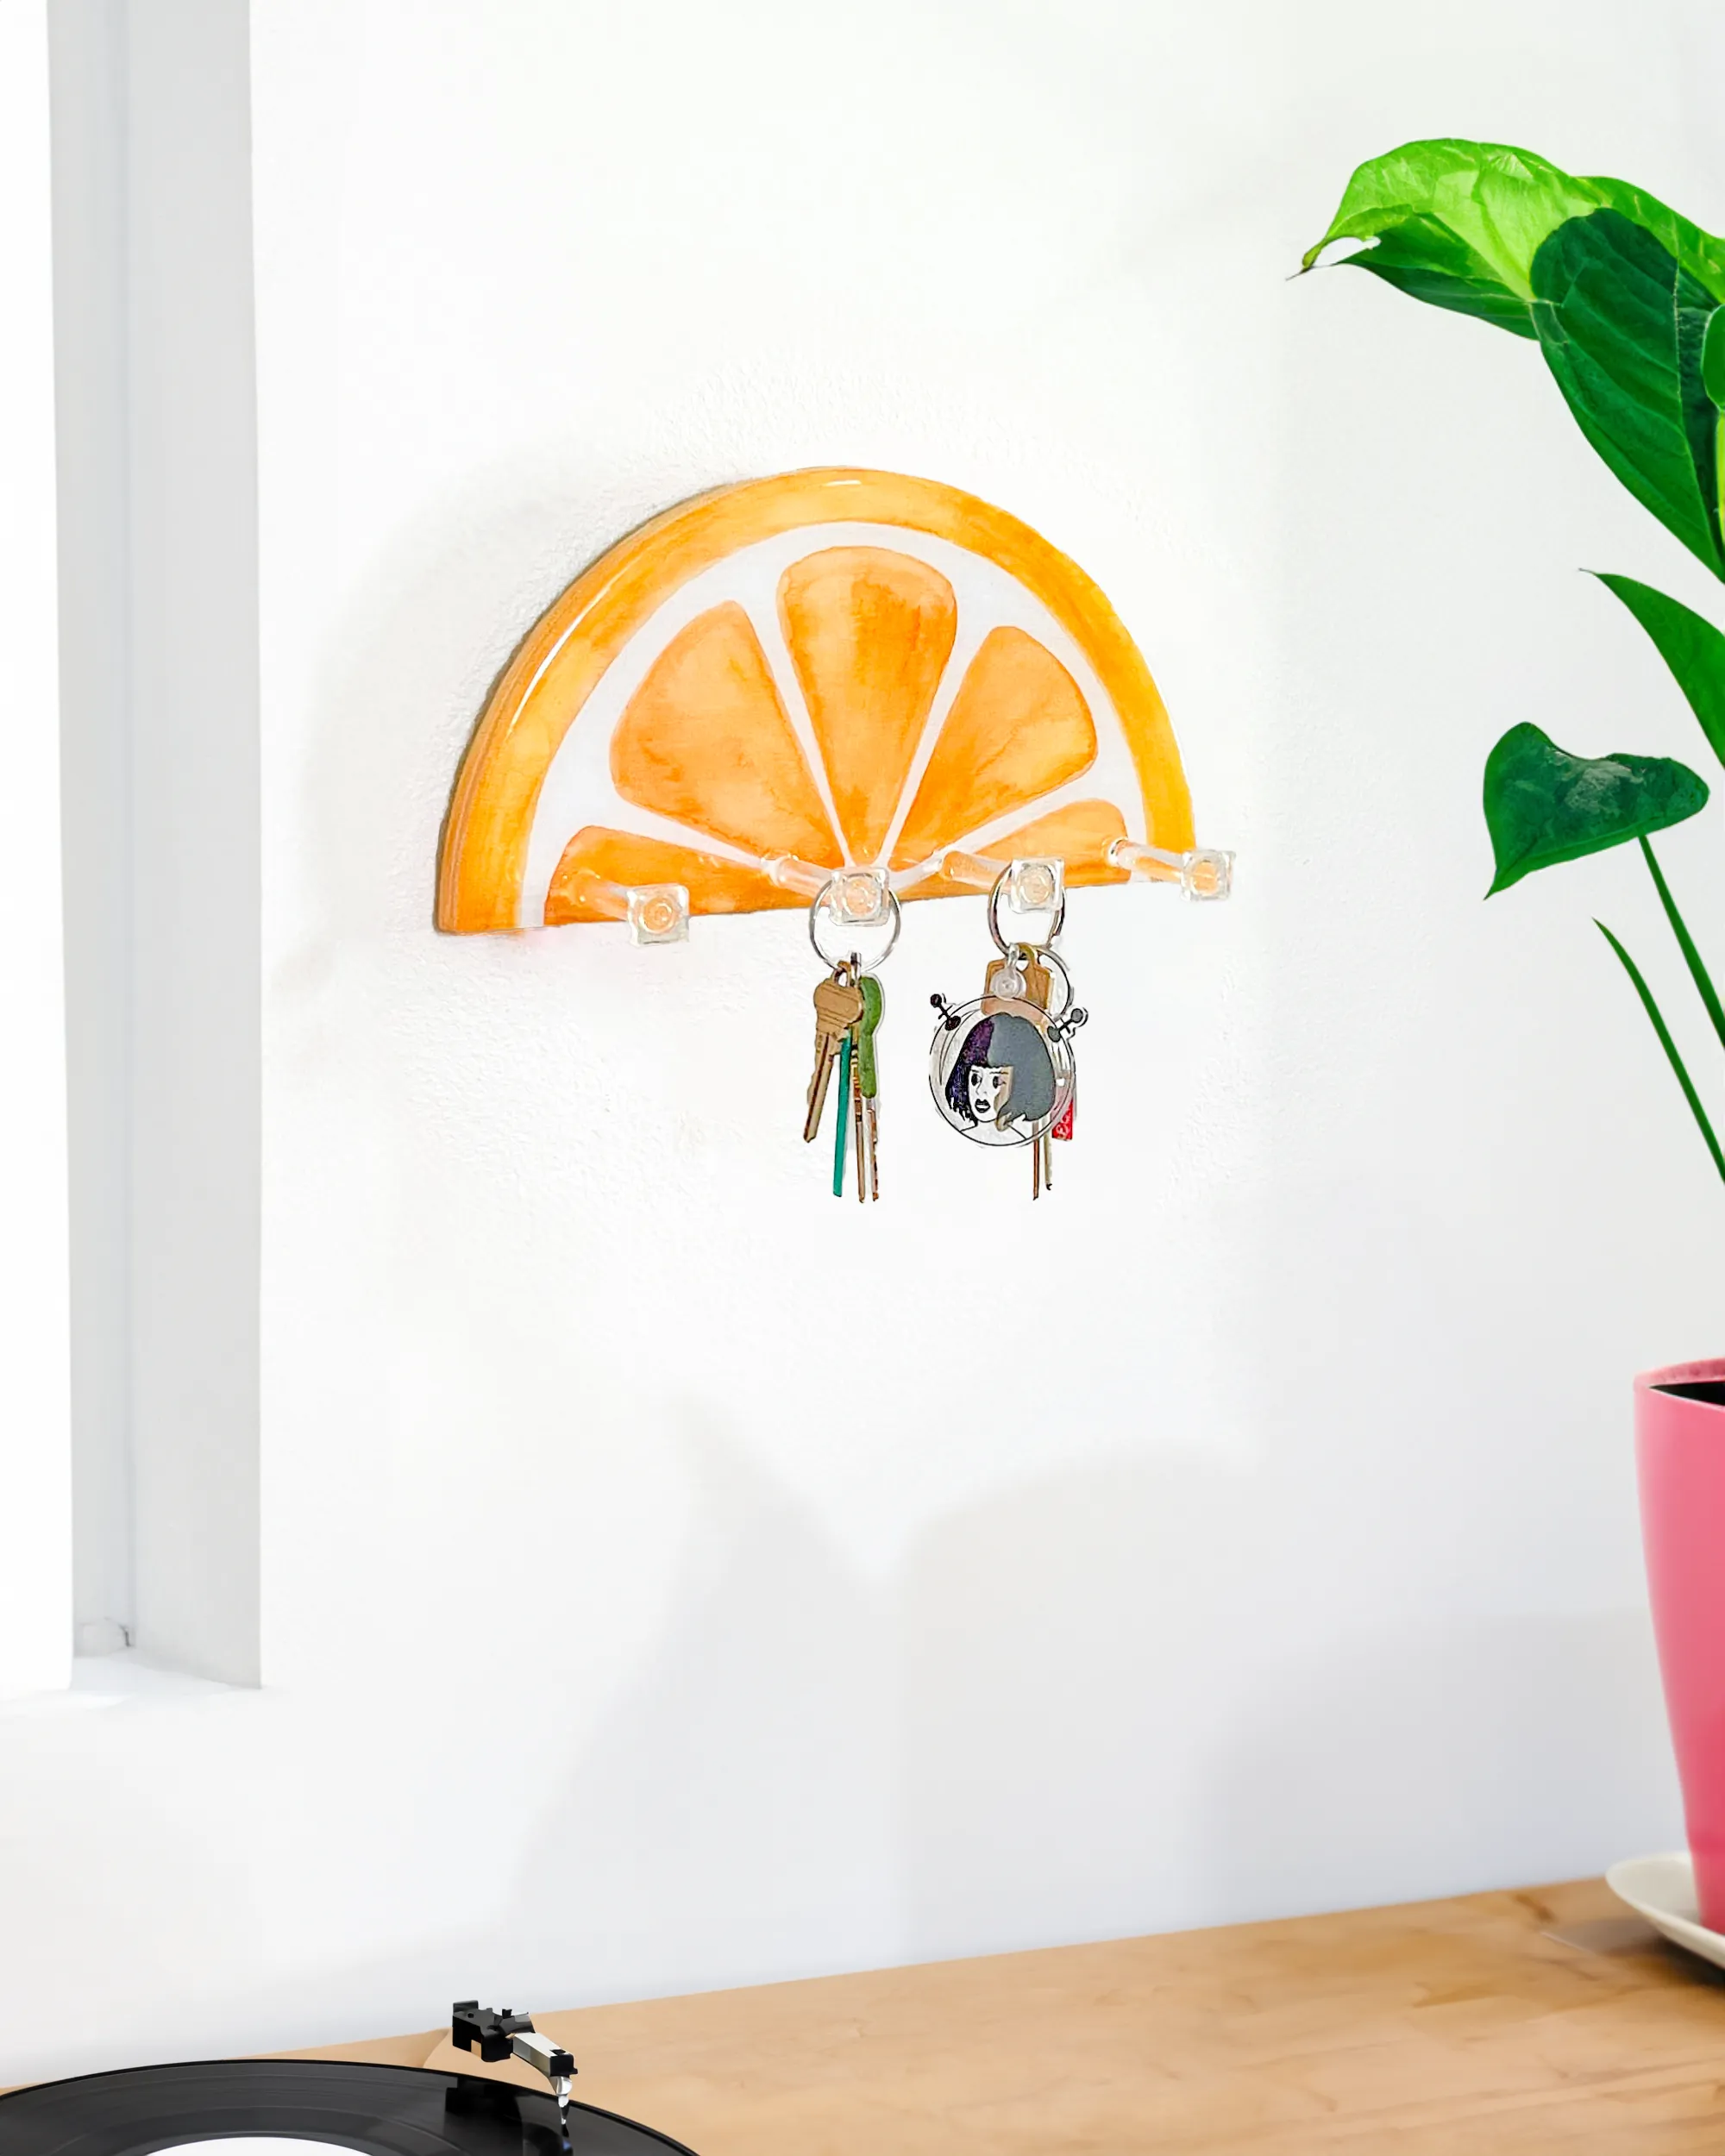 Wall-mounted orange slice key holder, demonstrating its use for organizing keys and small accessories